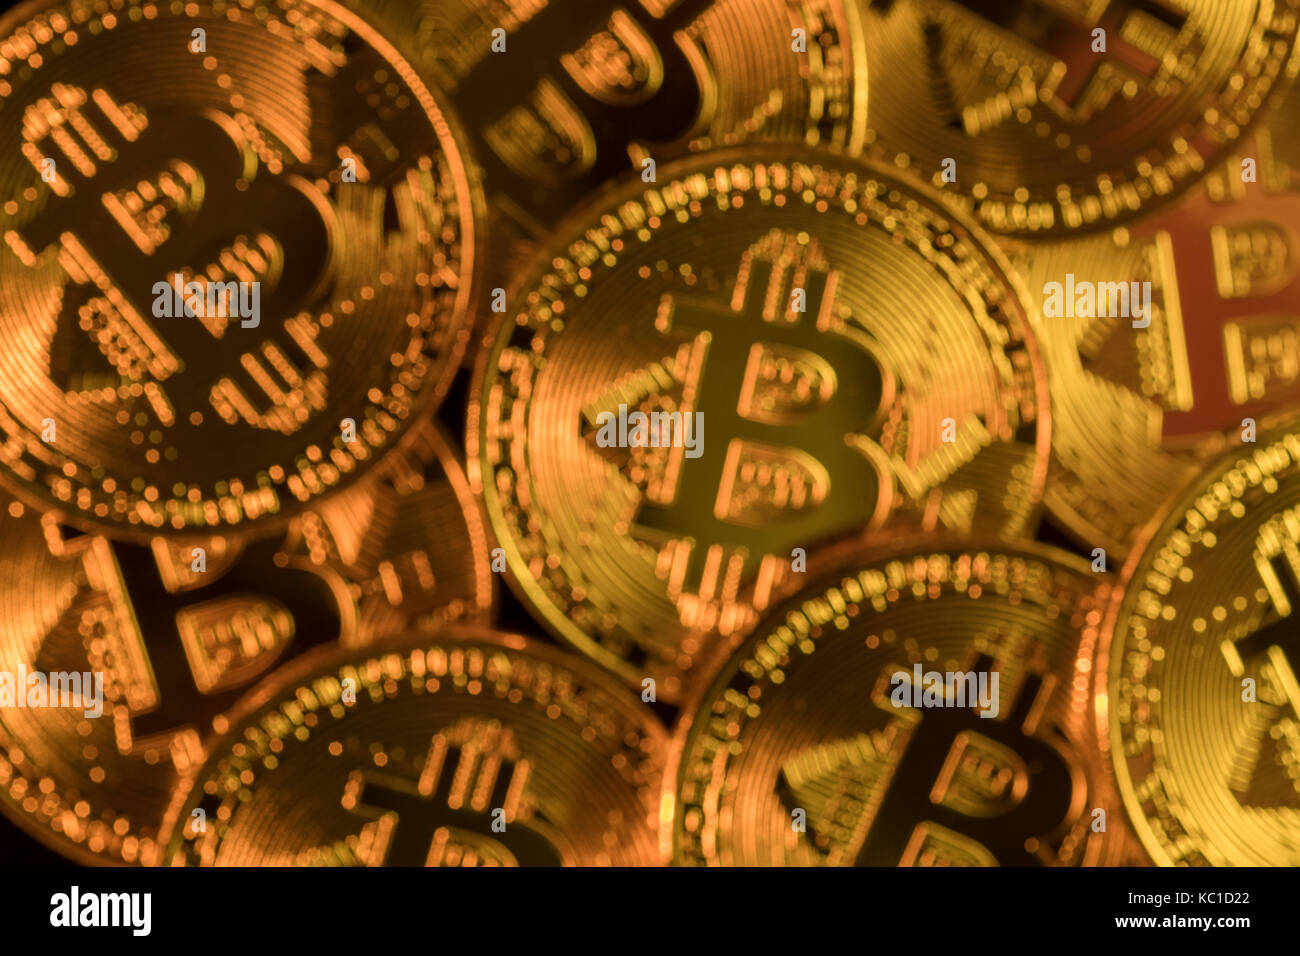 Gold Bitcoins as metaphor for concept of virtual currency, peer to peer digital payment, darkweb cybercrime, general cryptocurrencies, & exchange rate Stock Photo